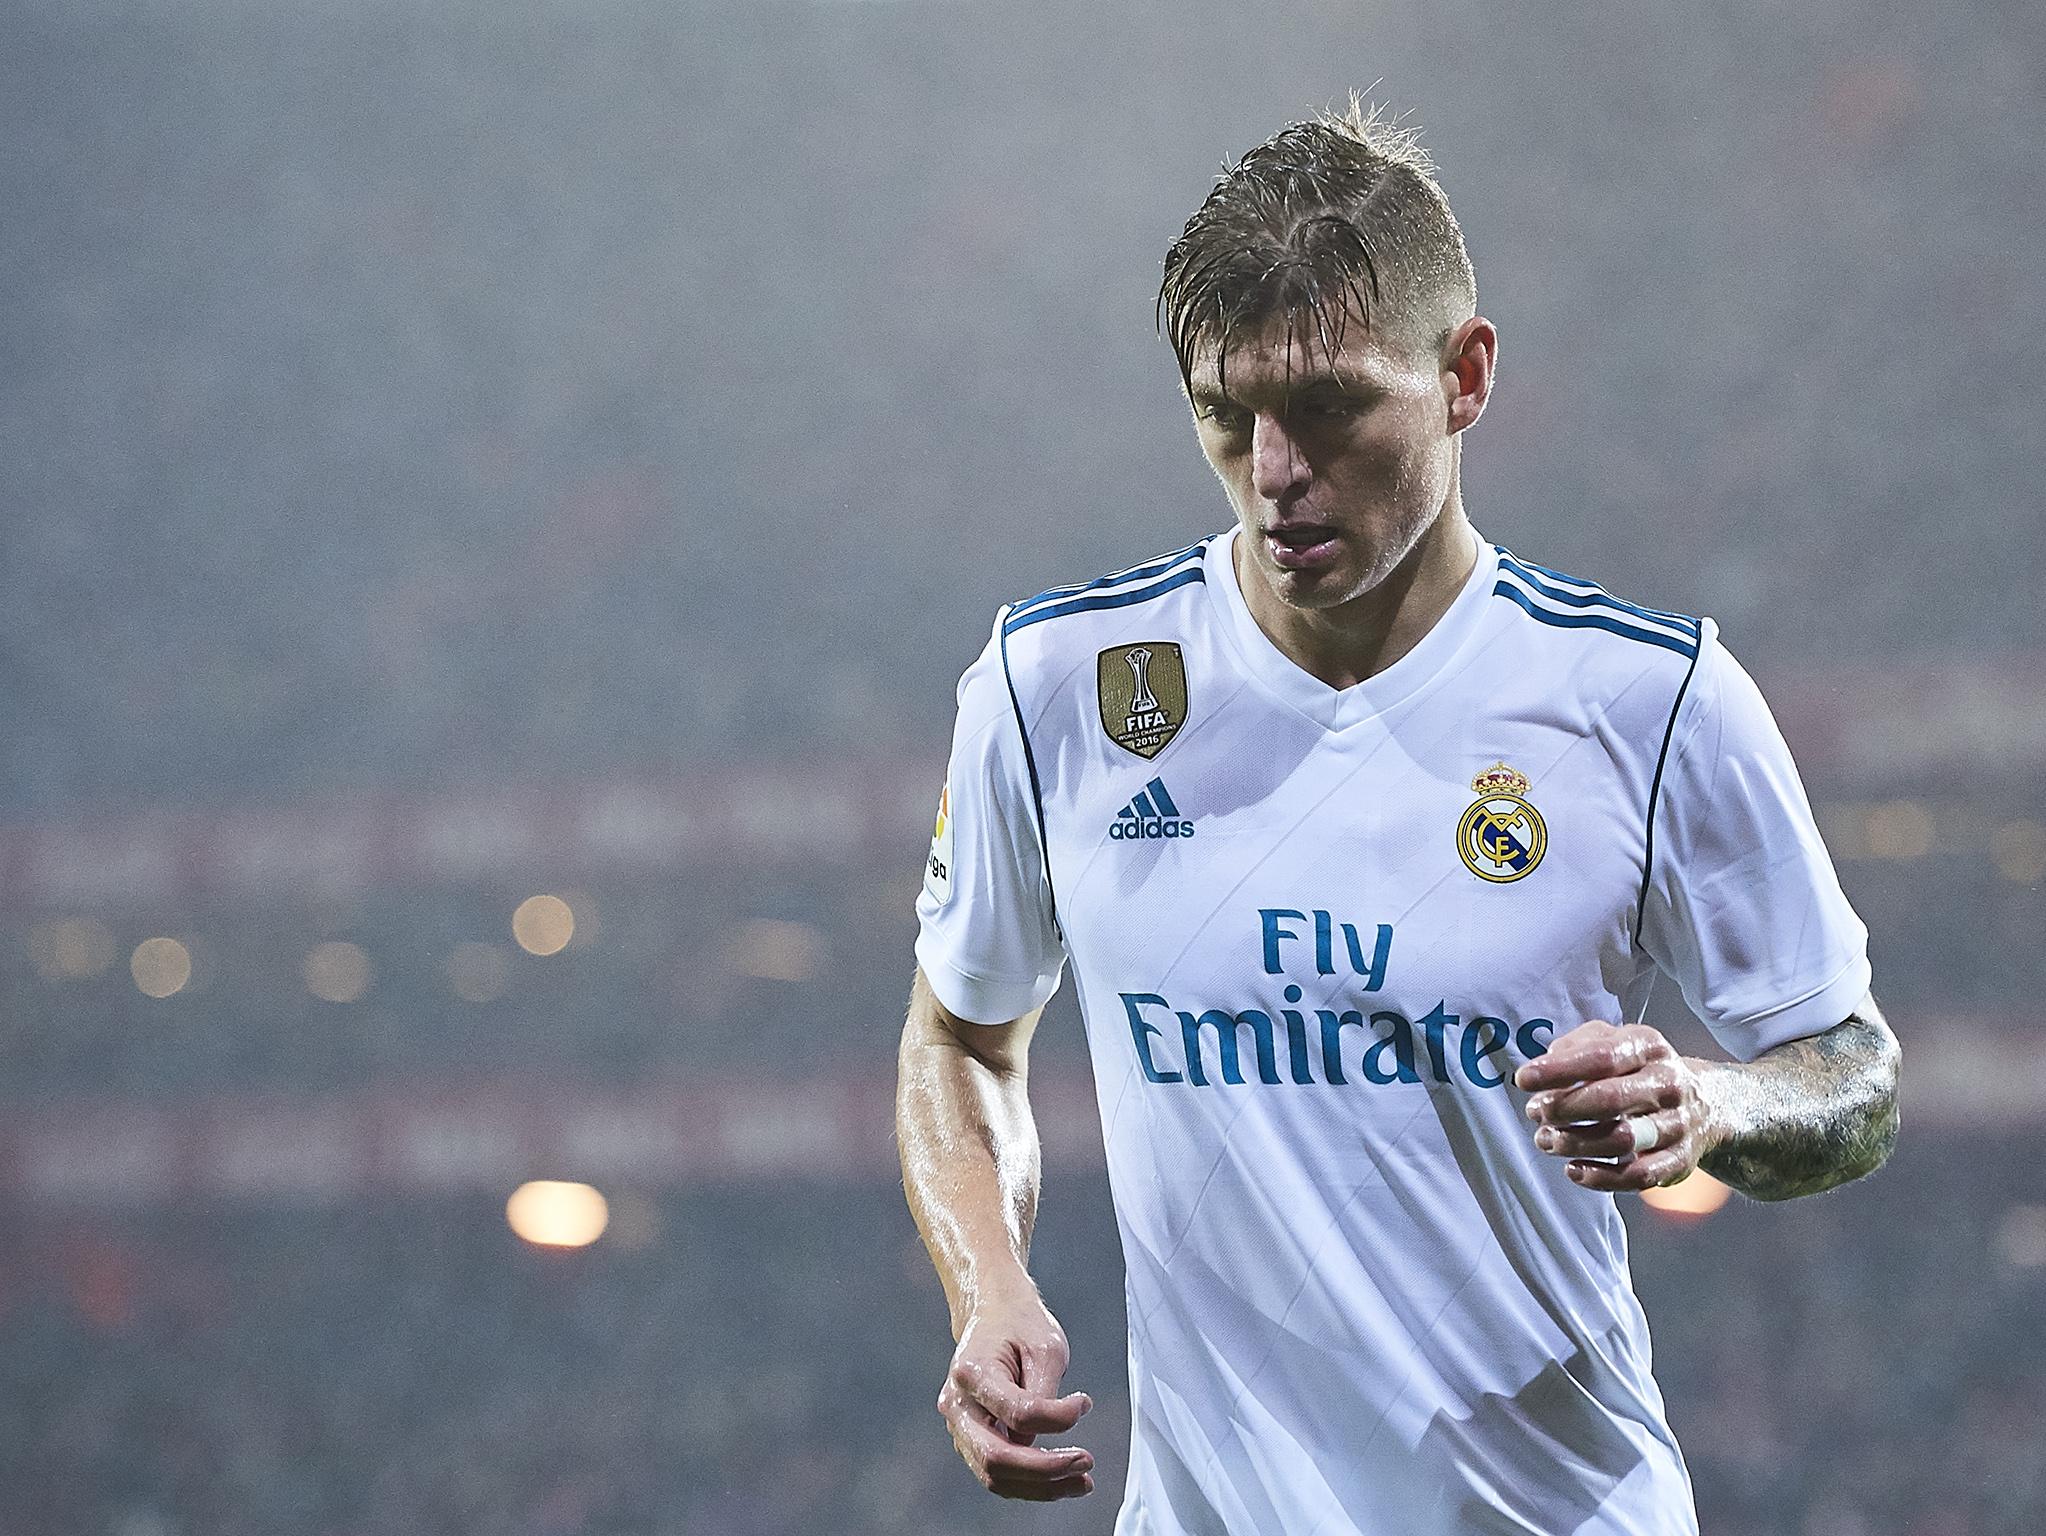 Kroos came close to joining Manchester United in 2014